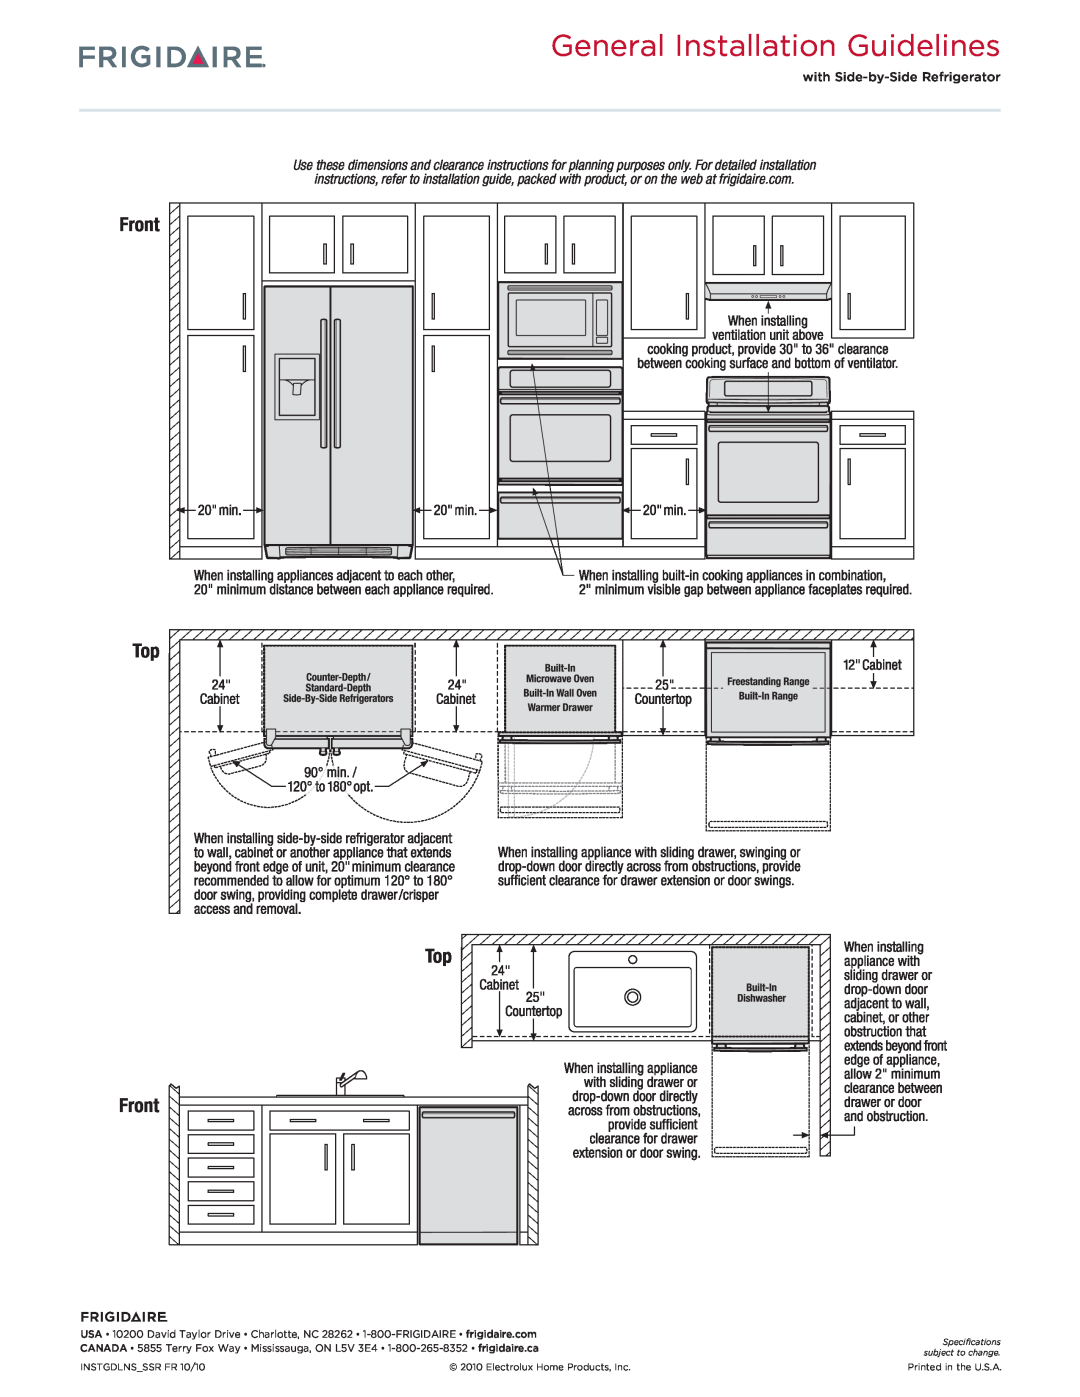 Frigidaire FPHS2386L F dimensions General Installation Guidelines, Top Front 